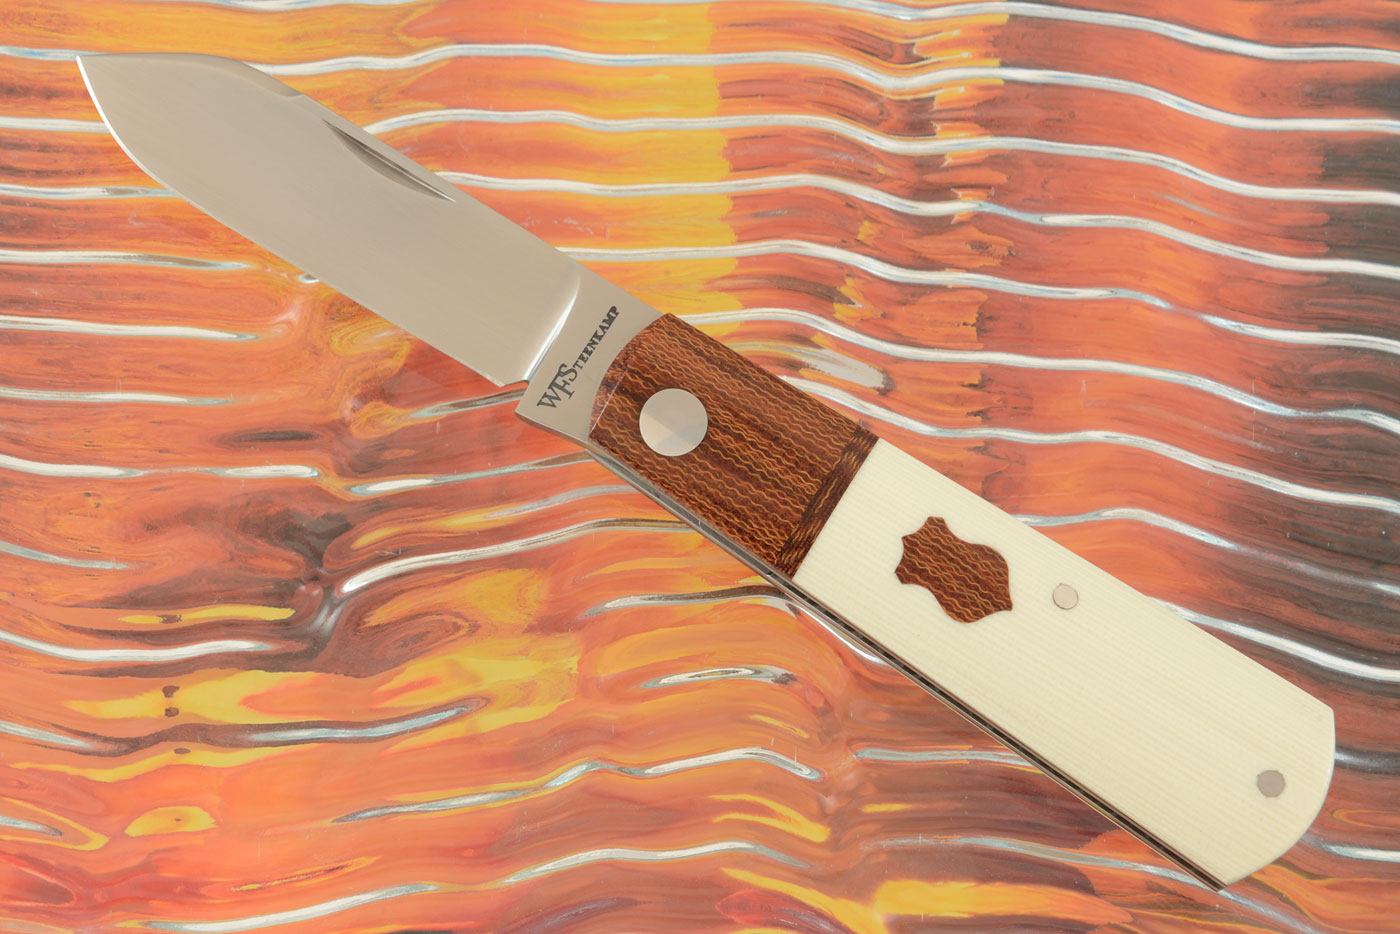 Barlow Slipjoint with Natural and Ivory Micarta